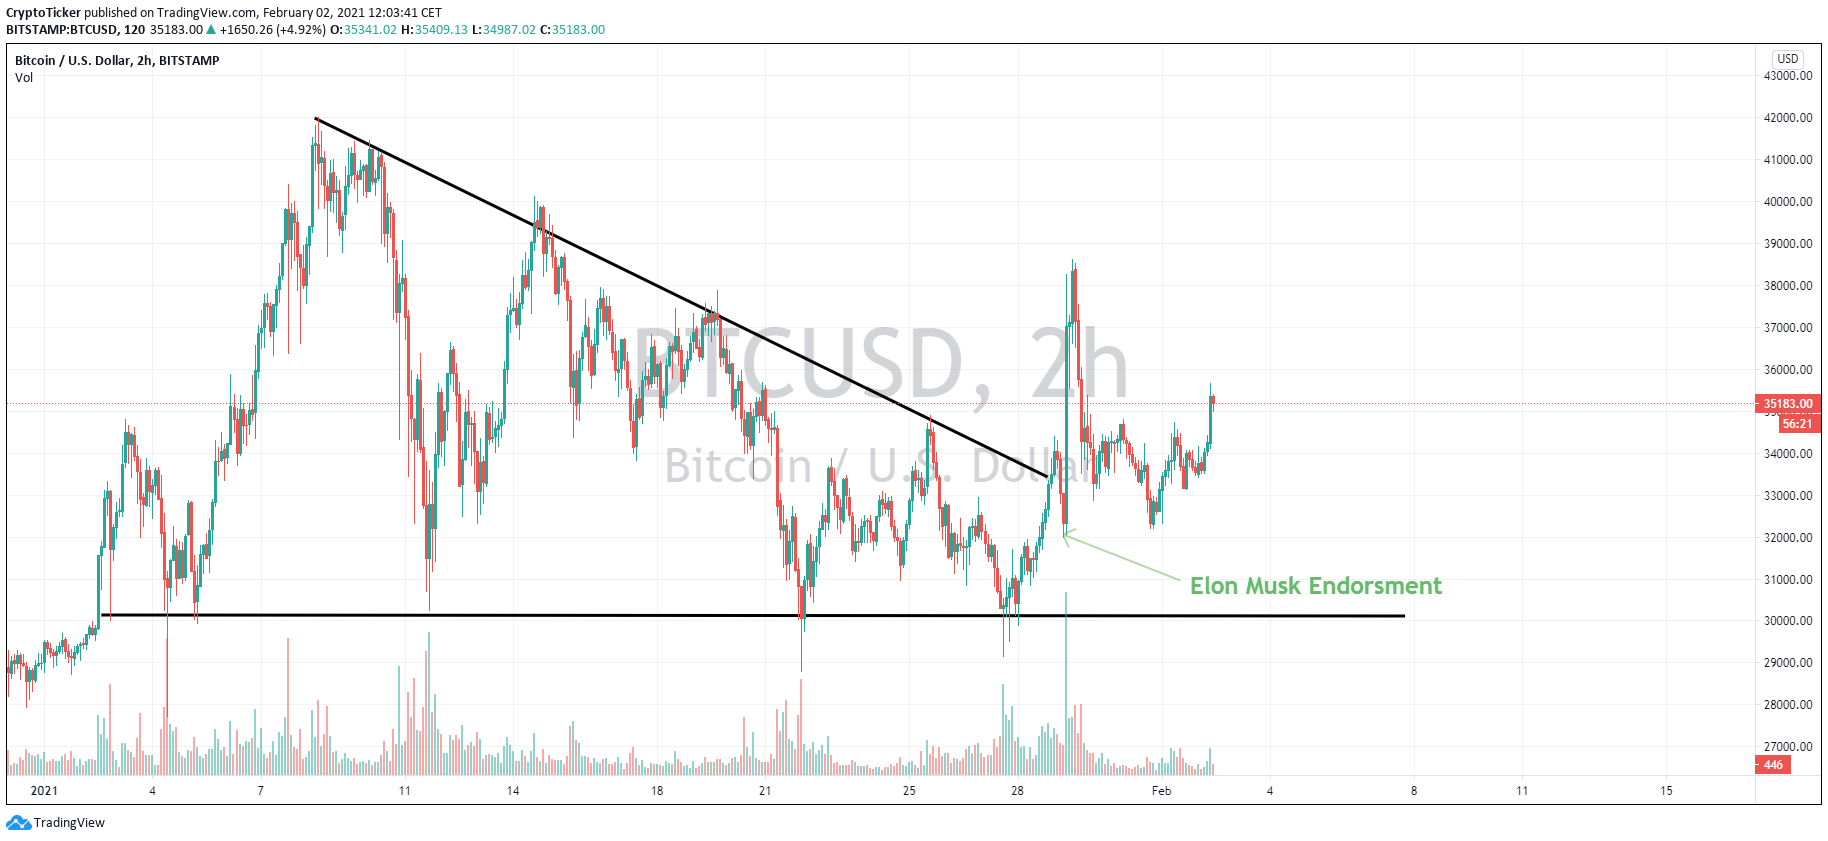 BTC/USD 2-hour chart showing a comeback from a descending triangle